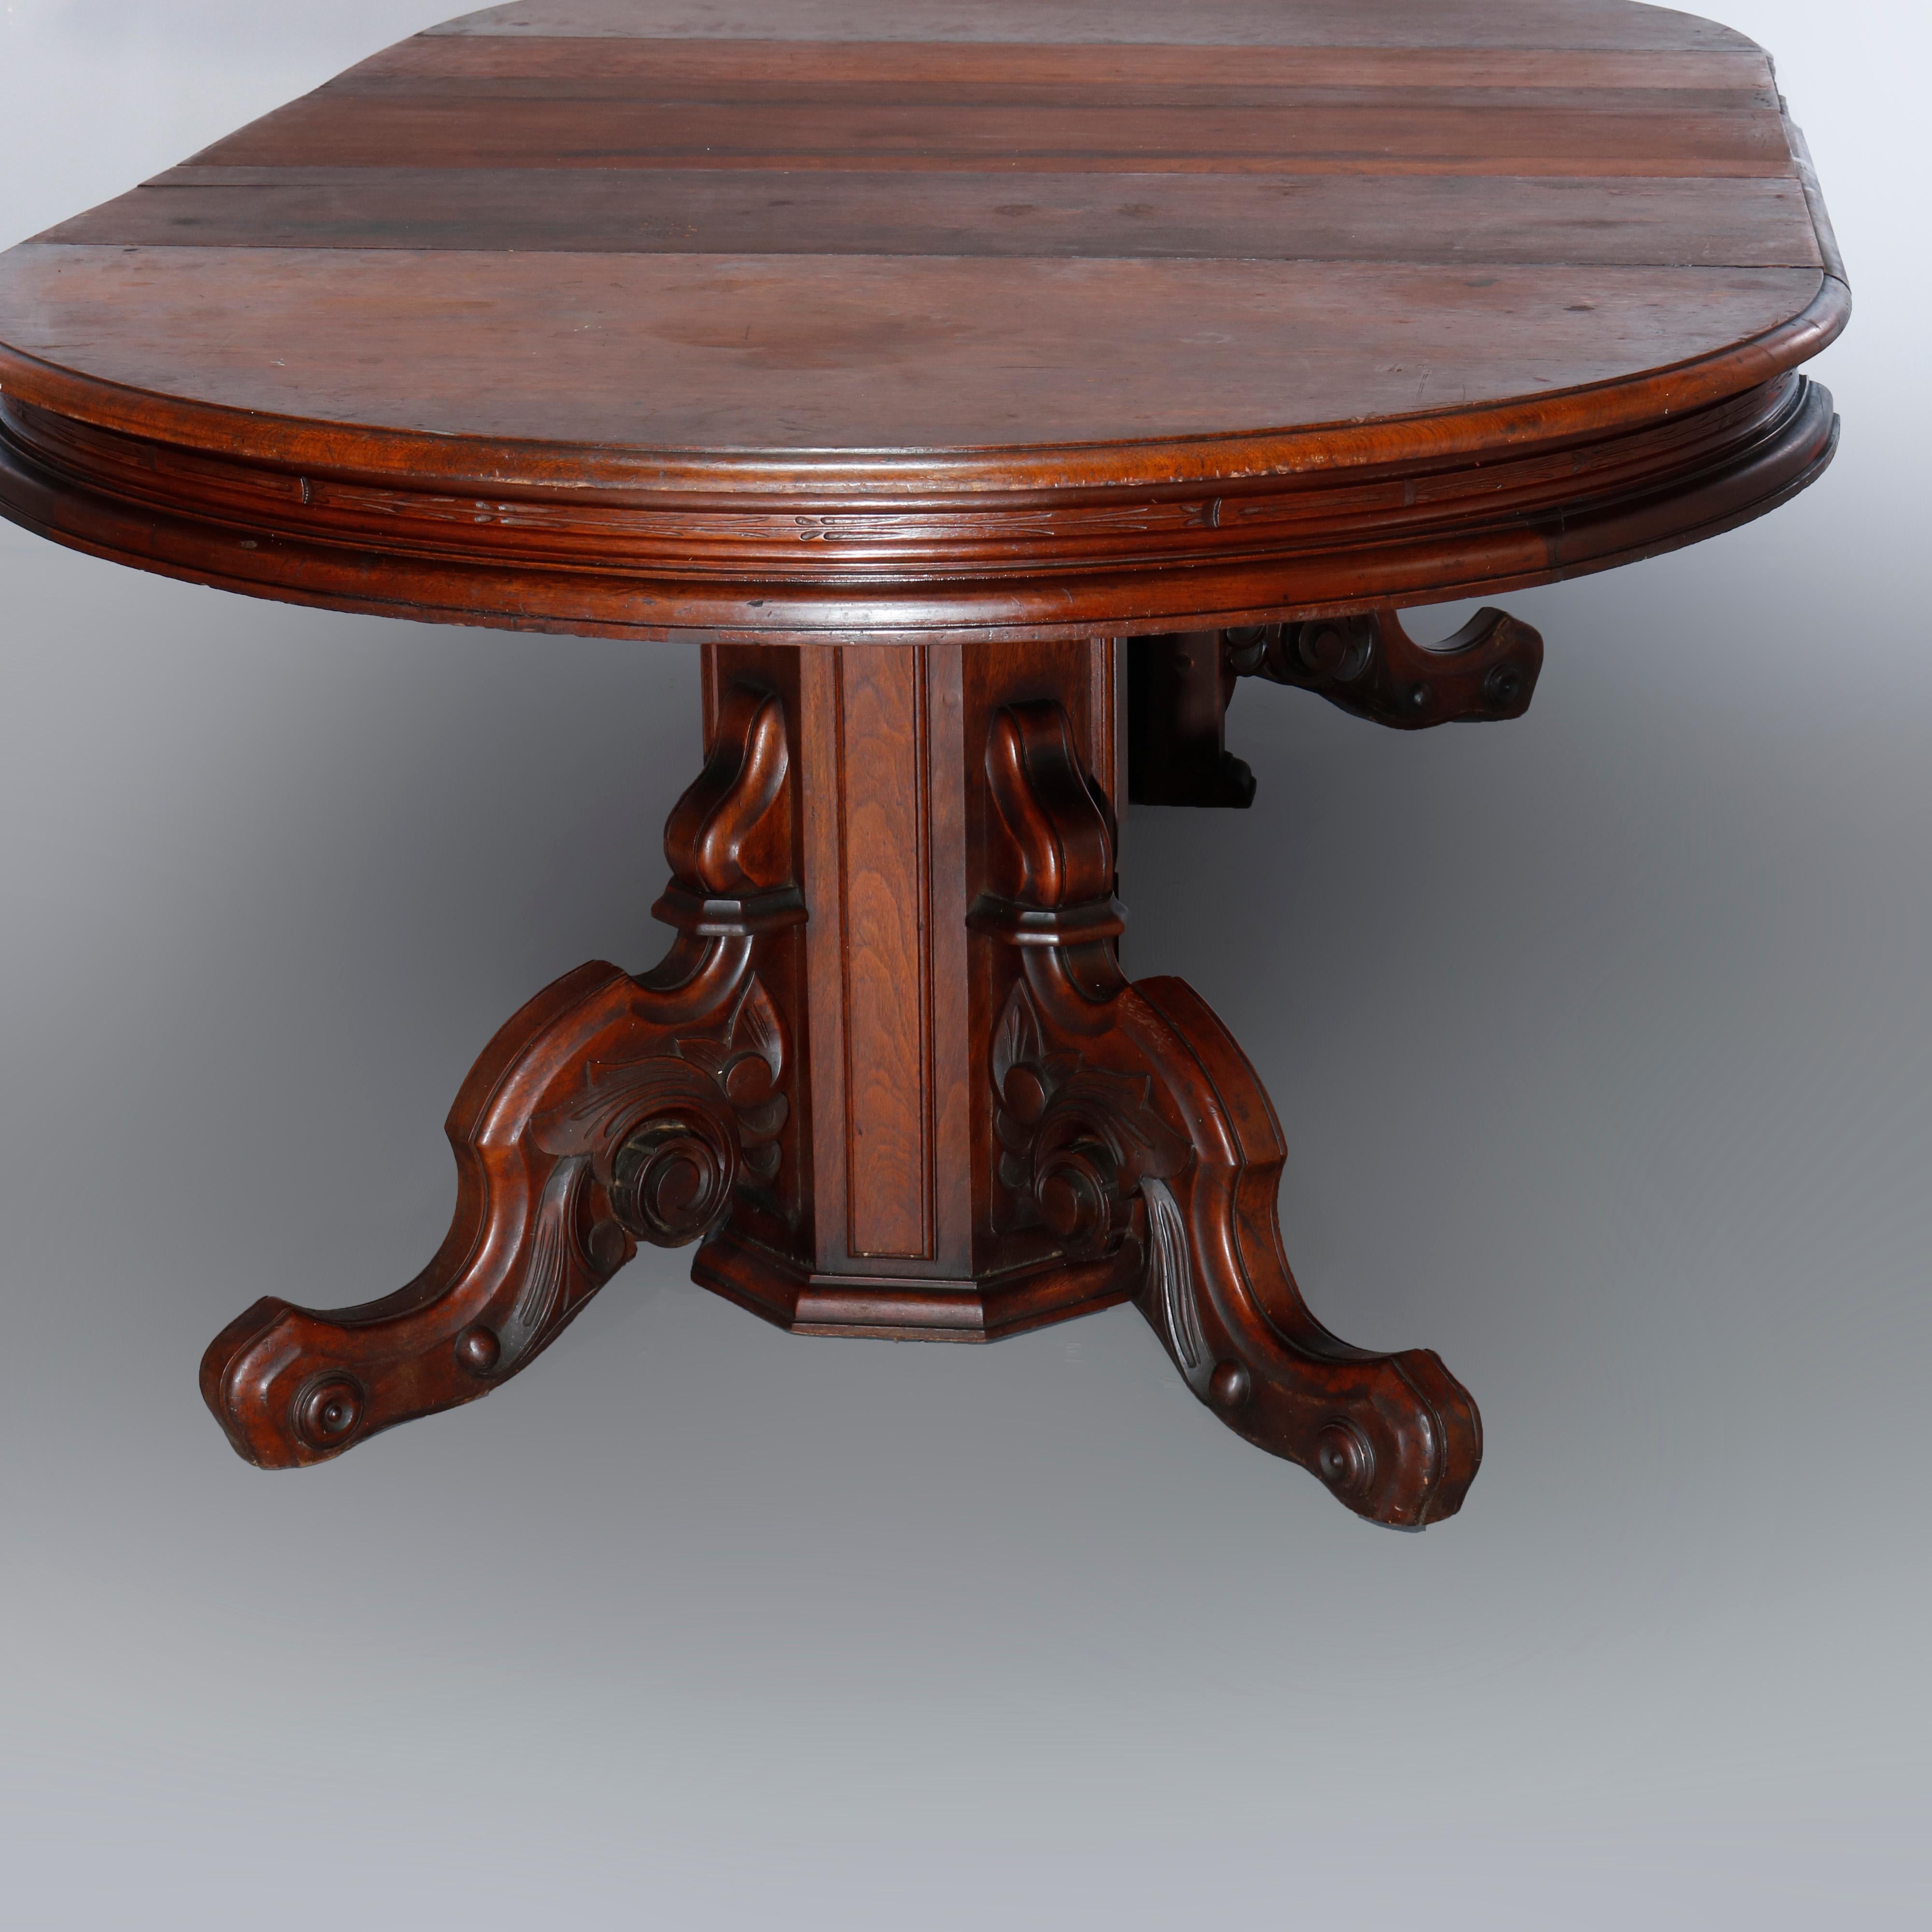 19th Century Antique Renaissance Revival Carved Walnut Extension Dining Table & Leaves, c1880